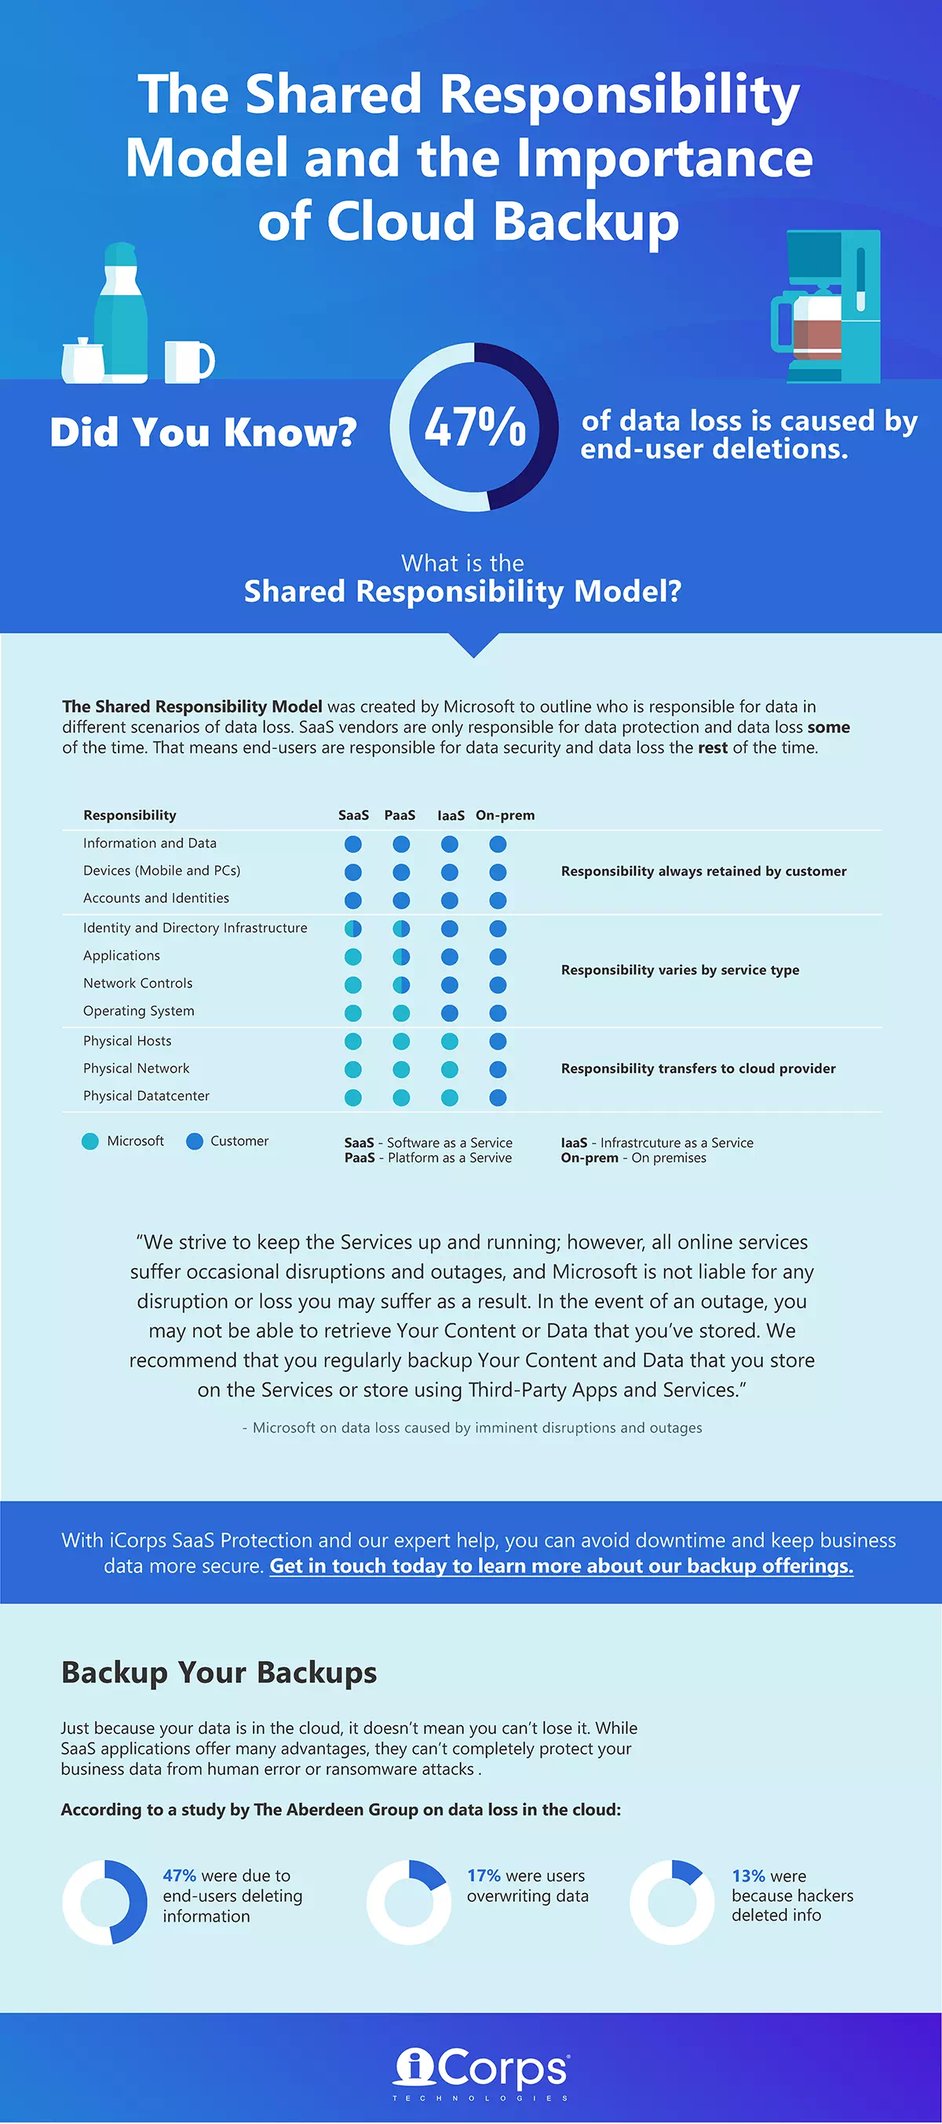 [INFOGRAPHIC] The Shared Responsibility Model and the Importance of Cloud Backup